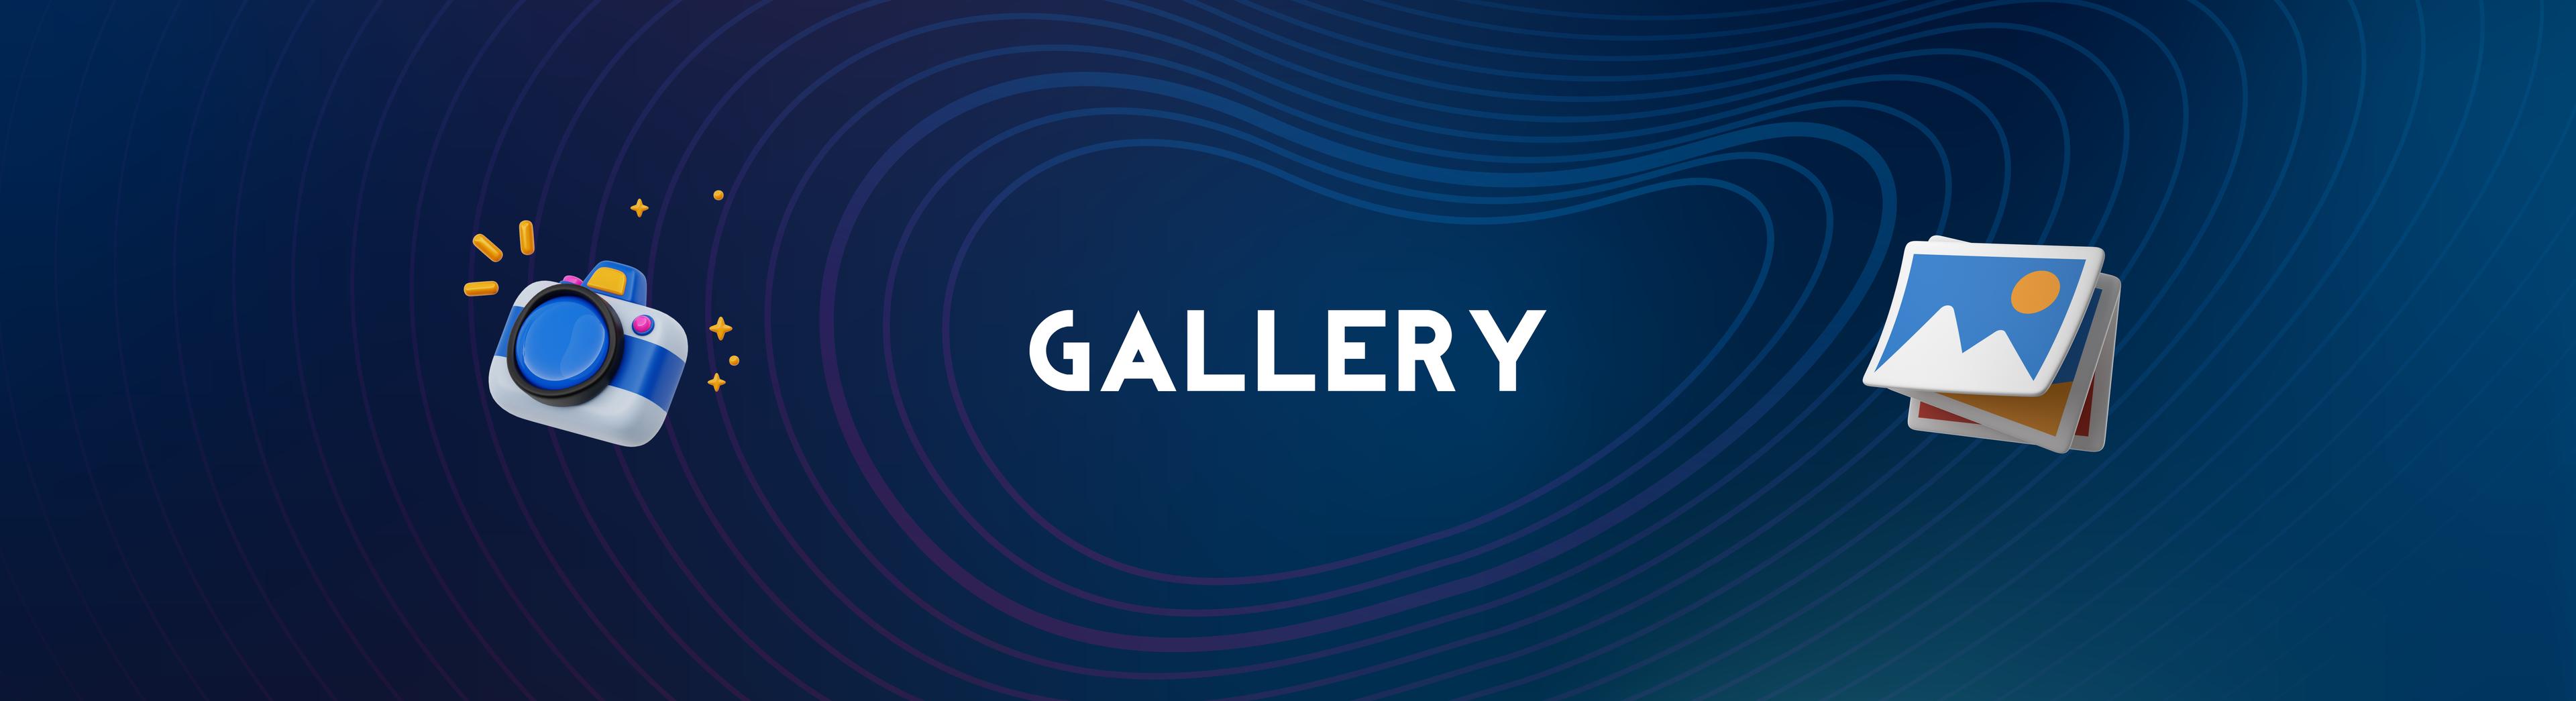 Gallery Banner Image